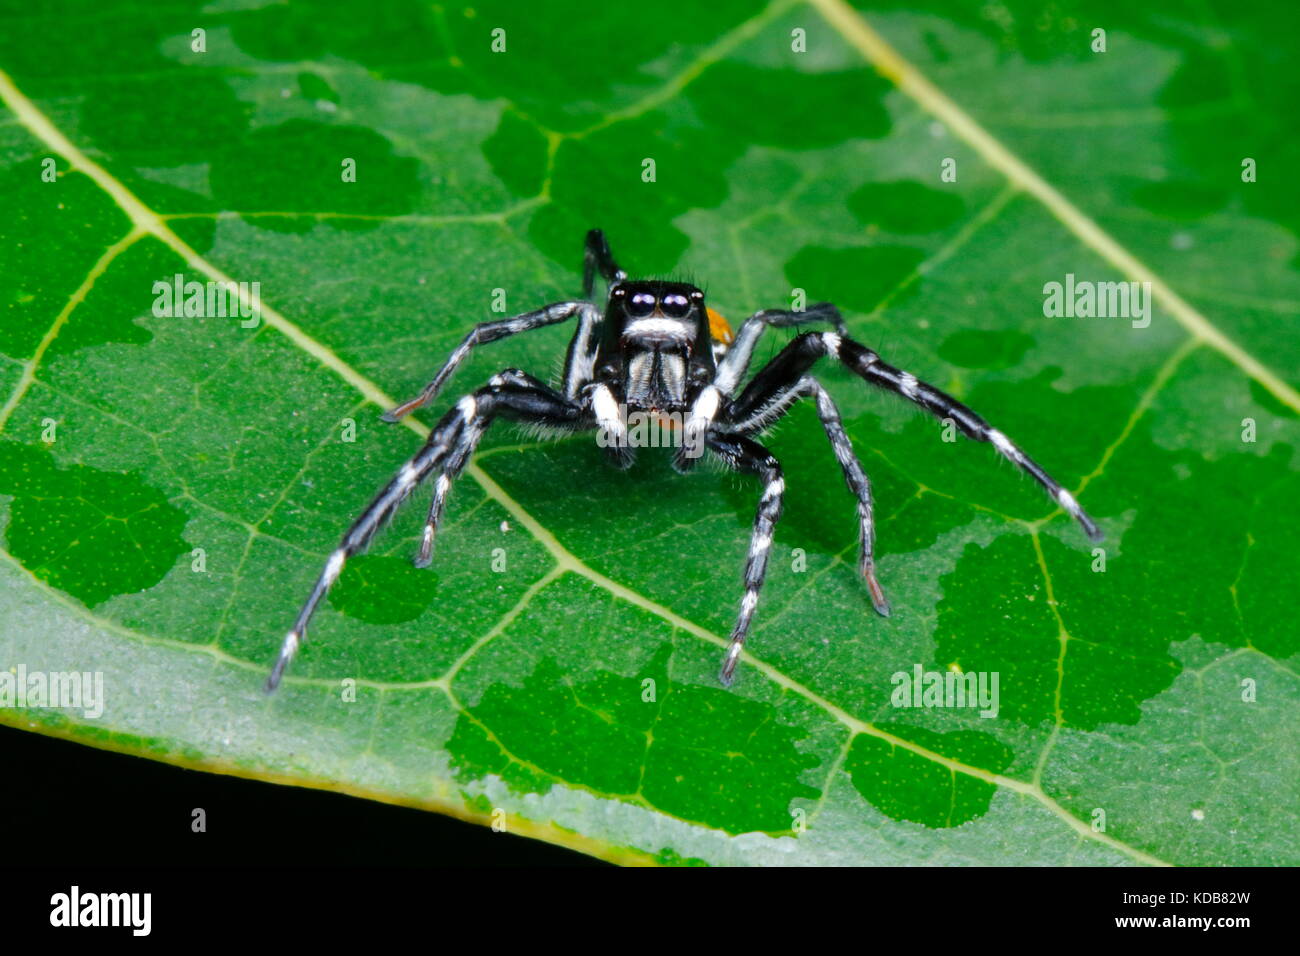 A Phidippus jumping spider on a leaf. Stock Photo